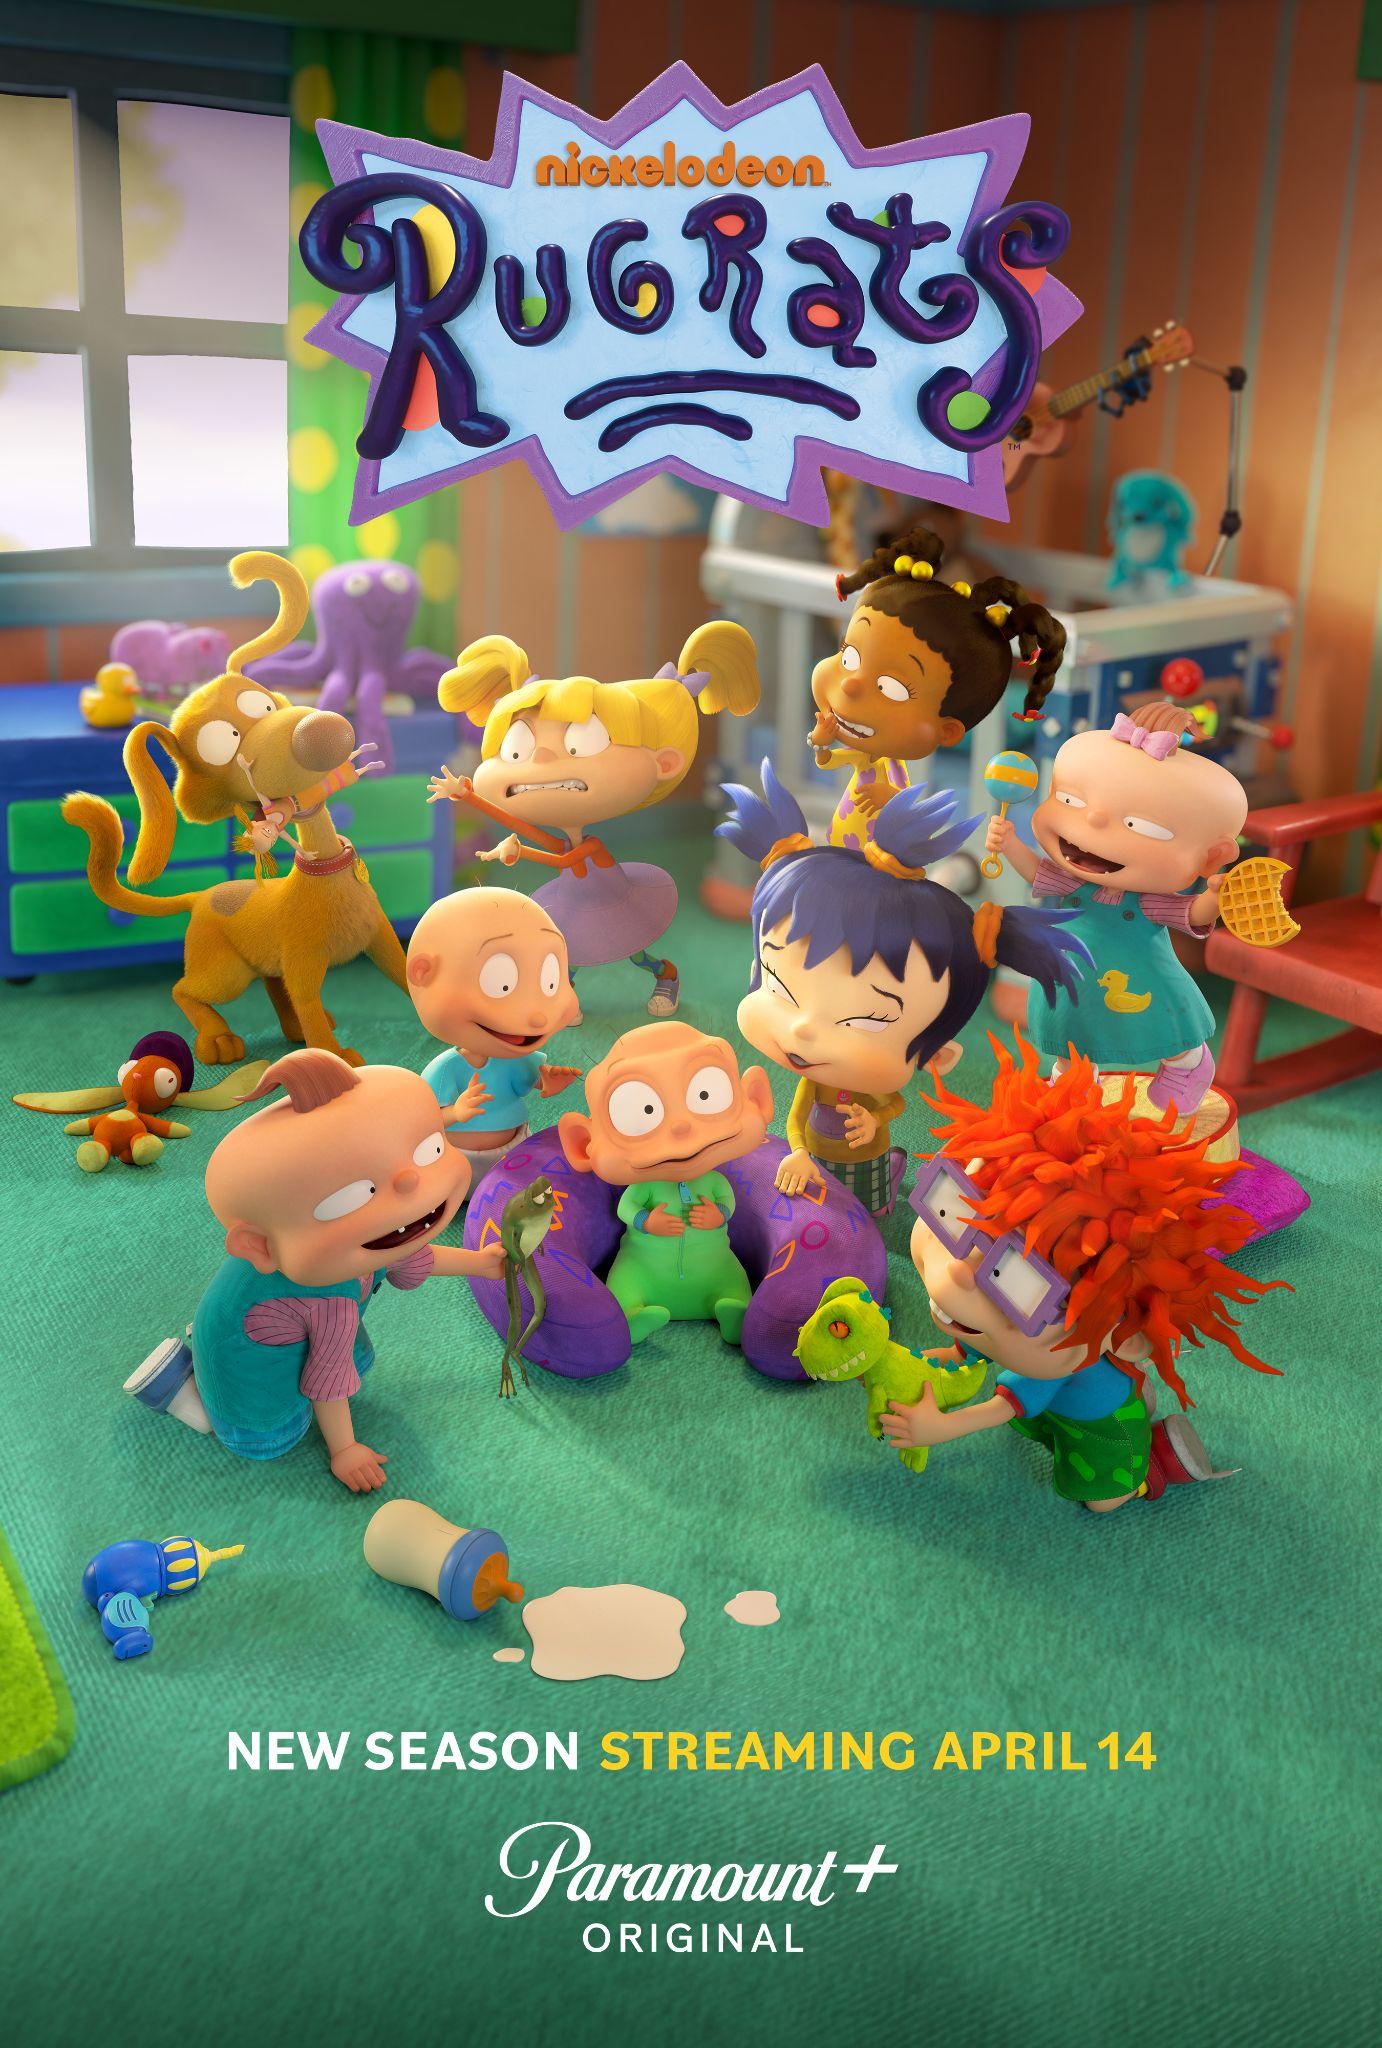 NickALive!: 'Baby Shark's Big Movie!' To Premiere on Nickelodeon and  Paramount+ in December 2023